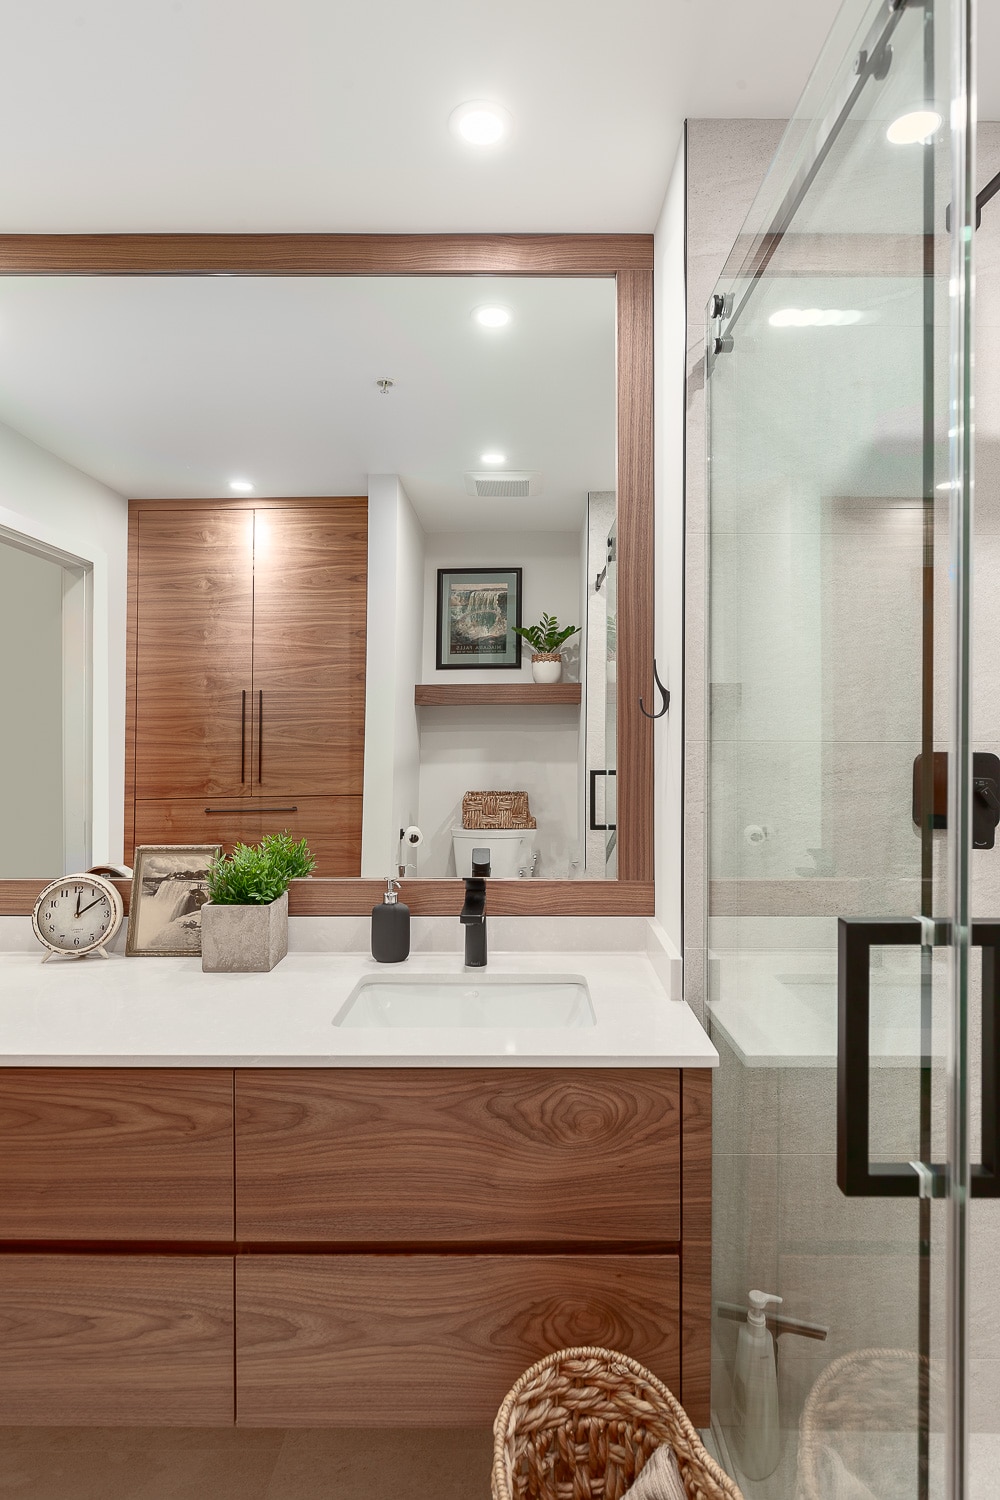 Bathroom Gallery: A modern bathroom with wood cabinets and a large mirror.